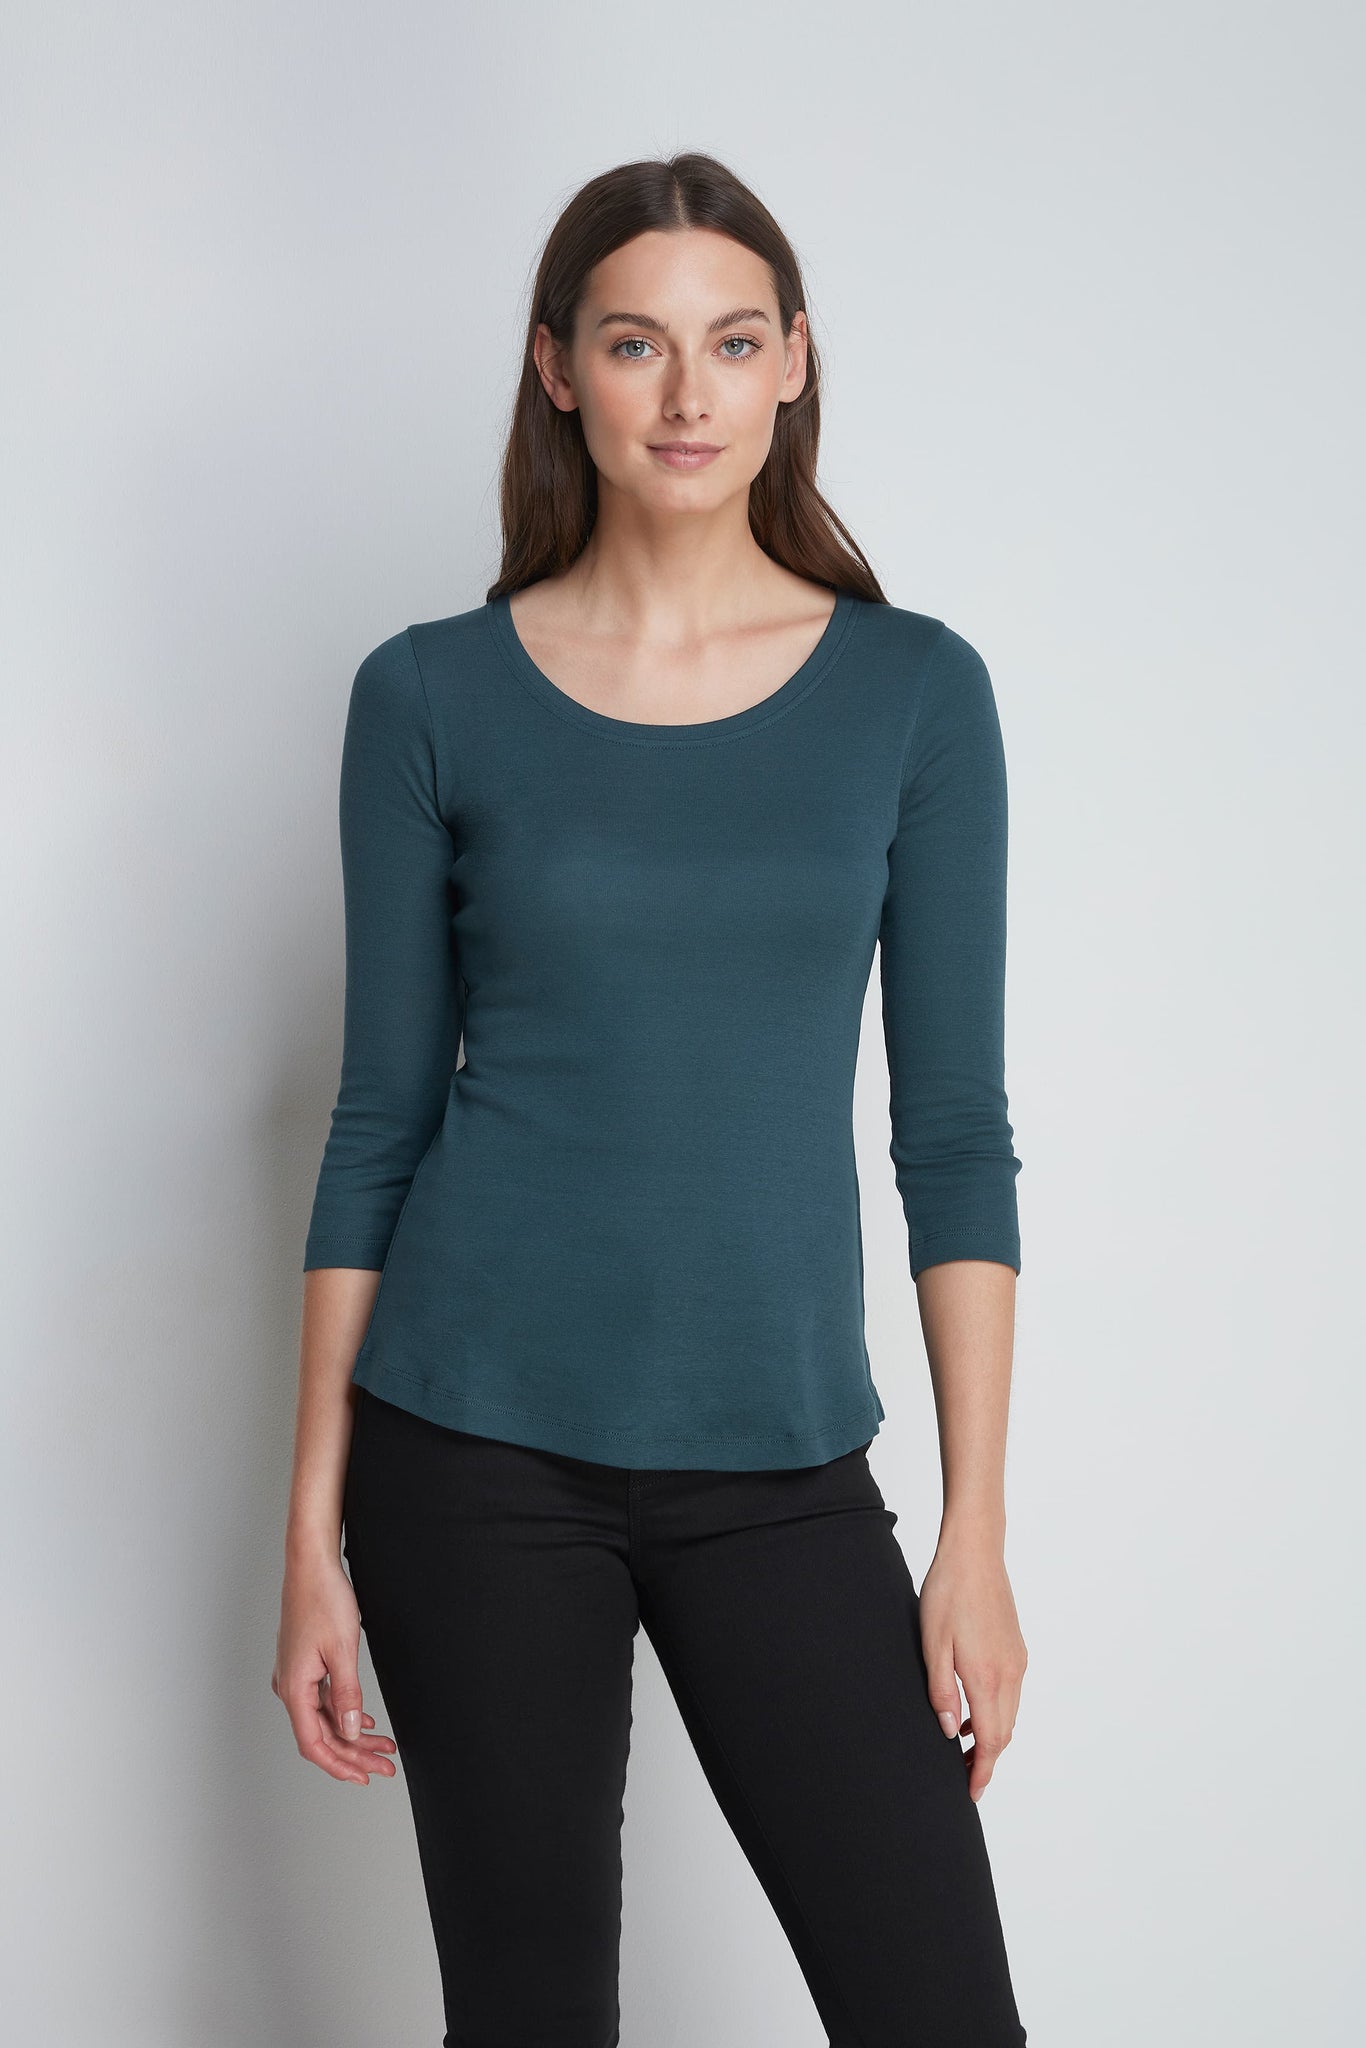 Women's Quality Cotton Jersey 3/4 Sleeve Scoop Neck T-Shirt in Green by Lavender Hill Clothing 